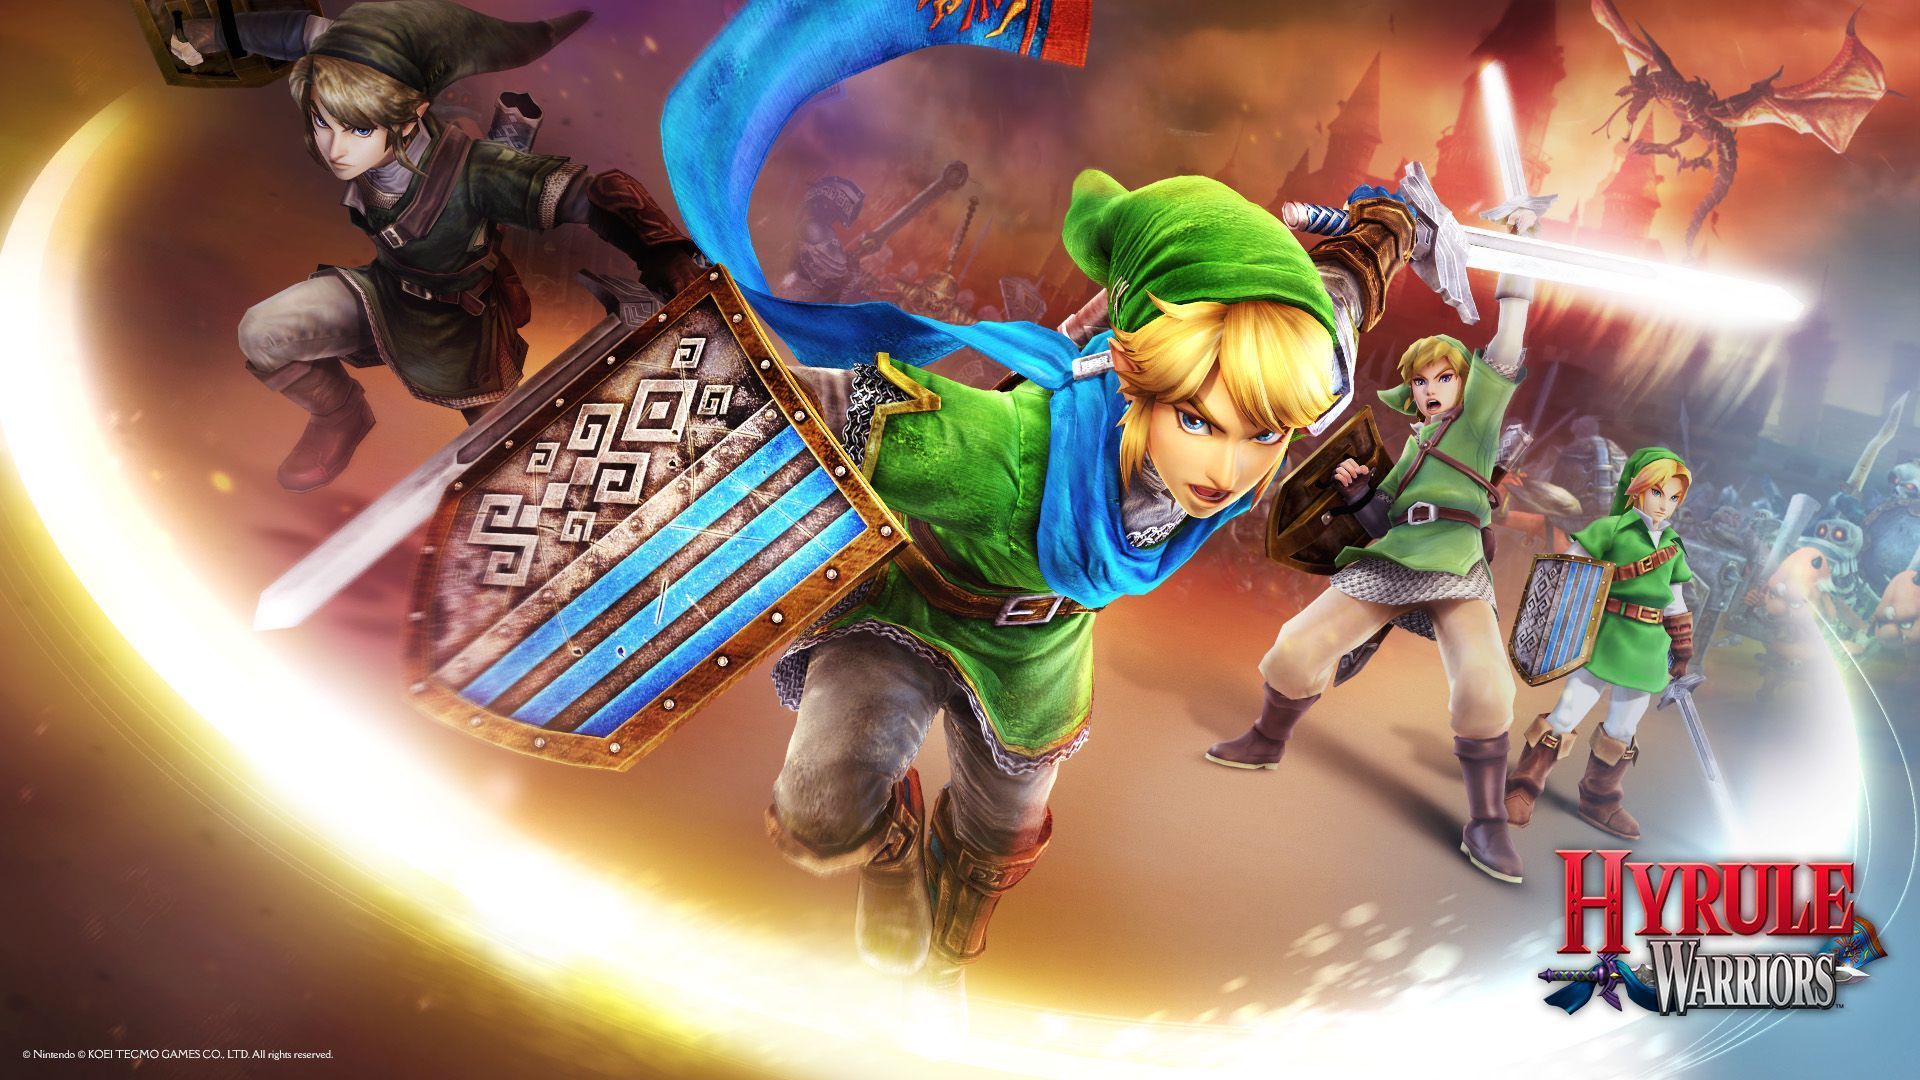 Official Site - Hyrule Warriors for Wii U